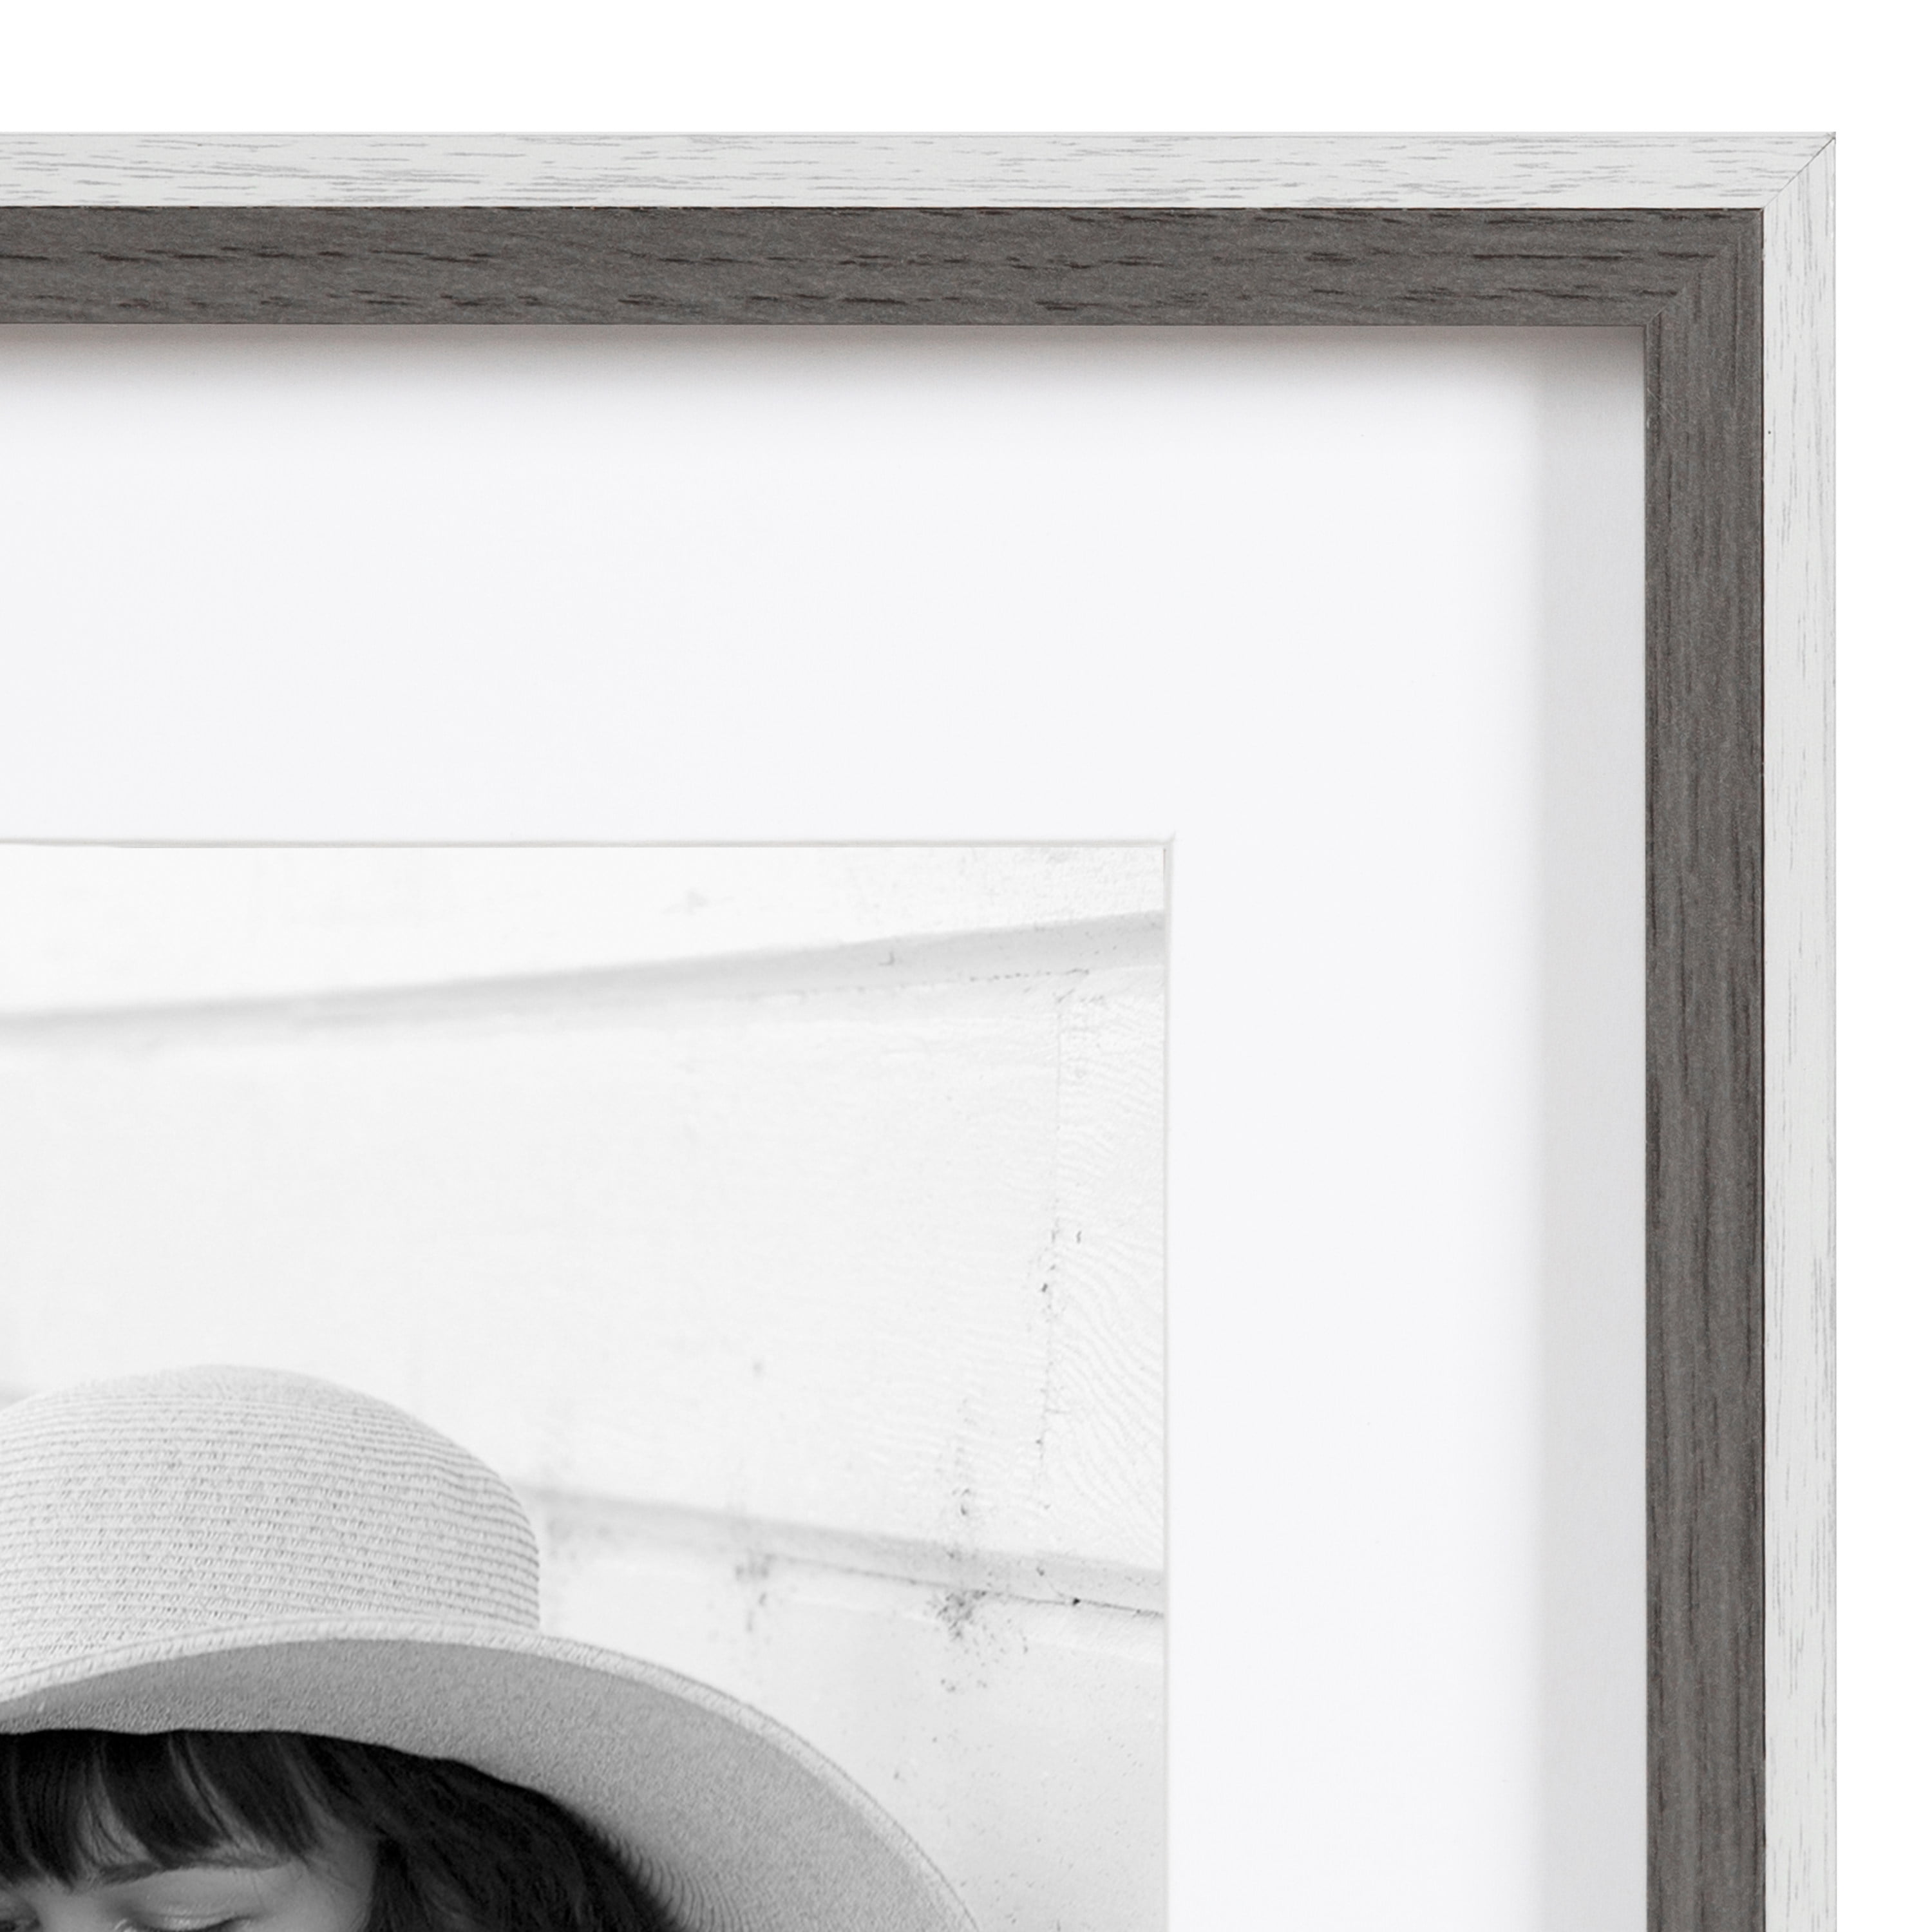 Clive Transitional Wall Frame Set, 11x14 matted to 8x10, Set of 2